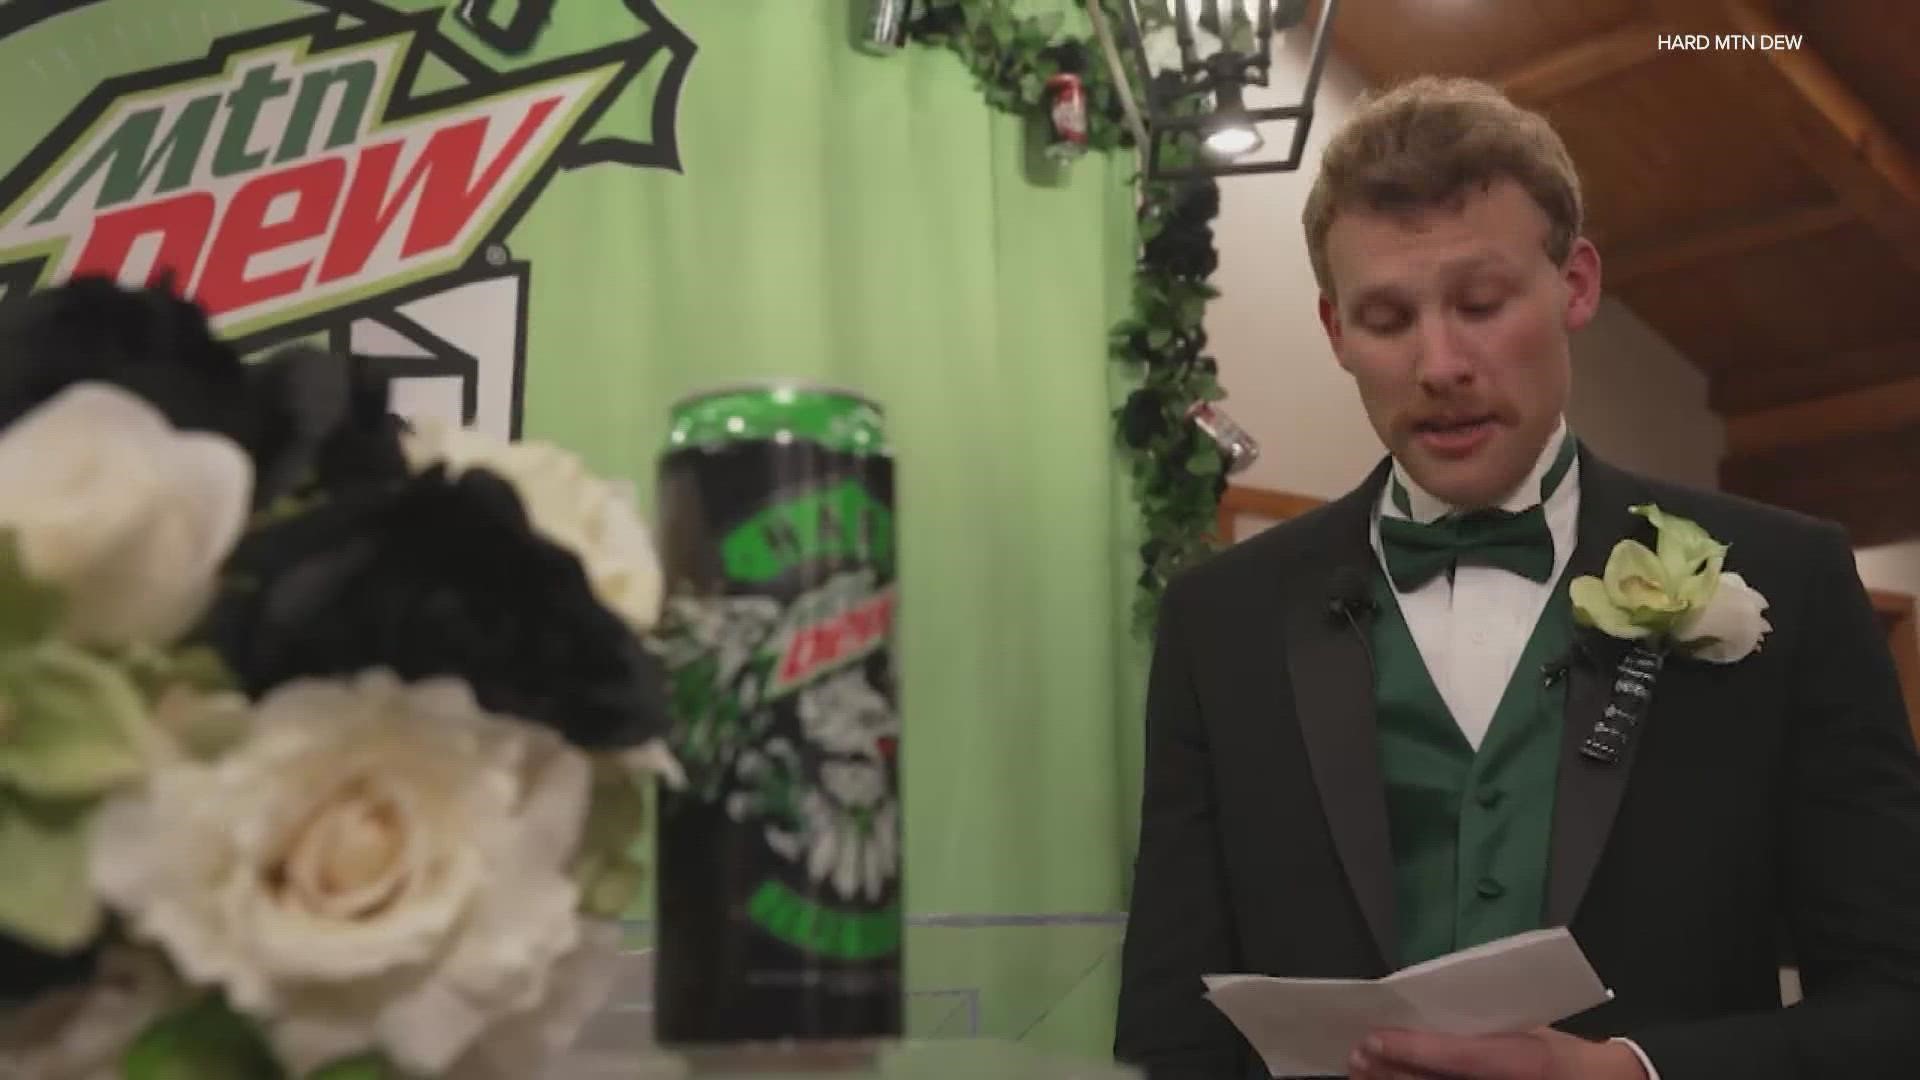 An Indiana man married a can of Mountain Dew in Las Vegas